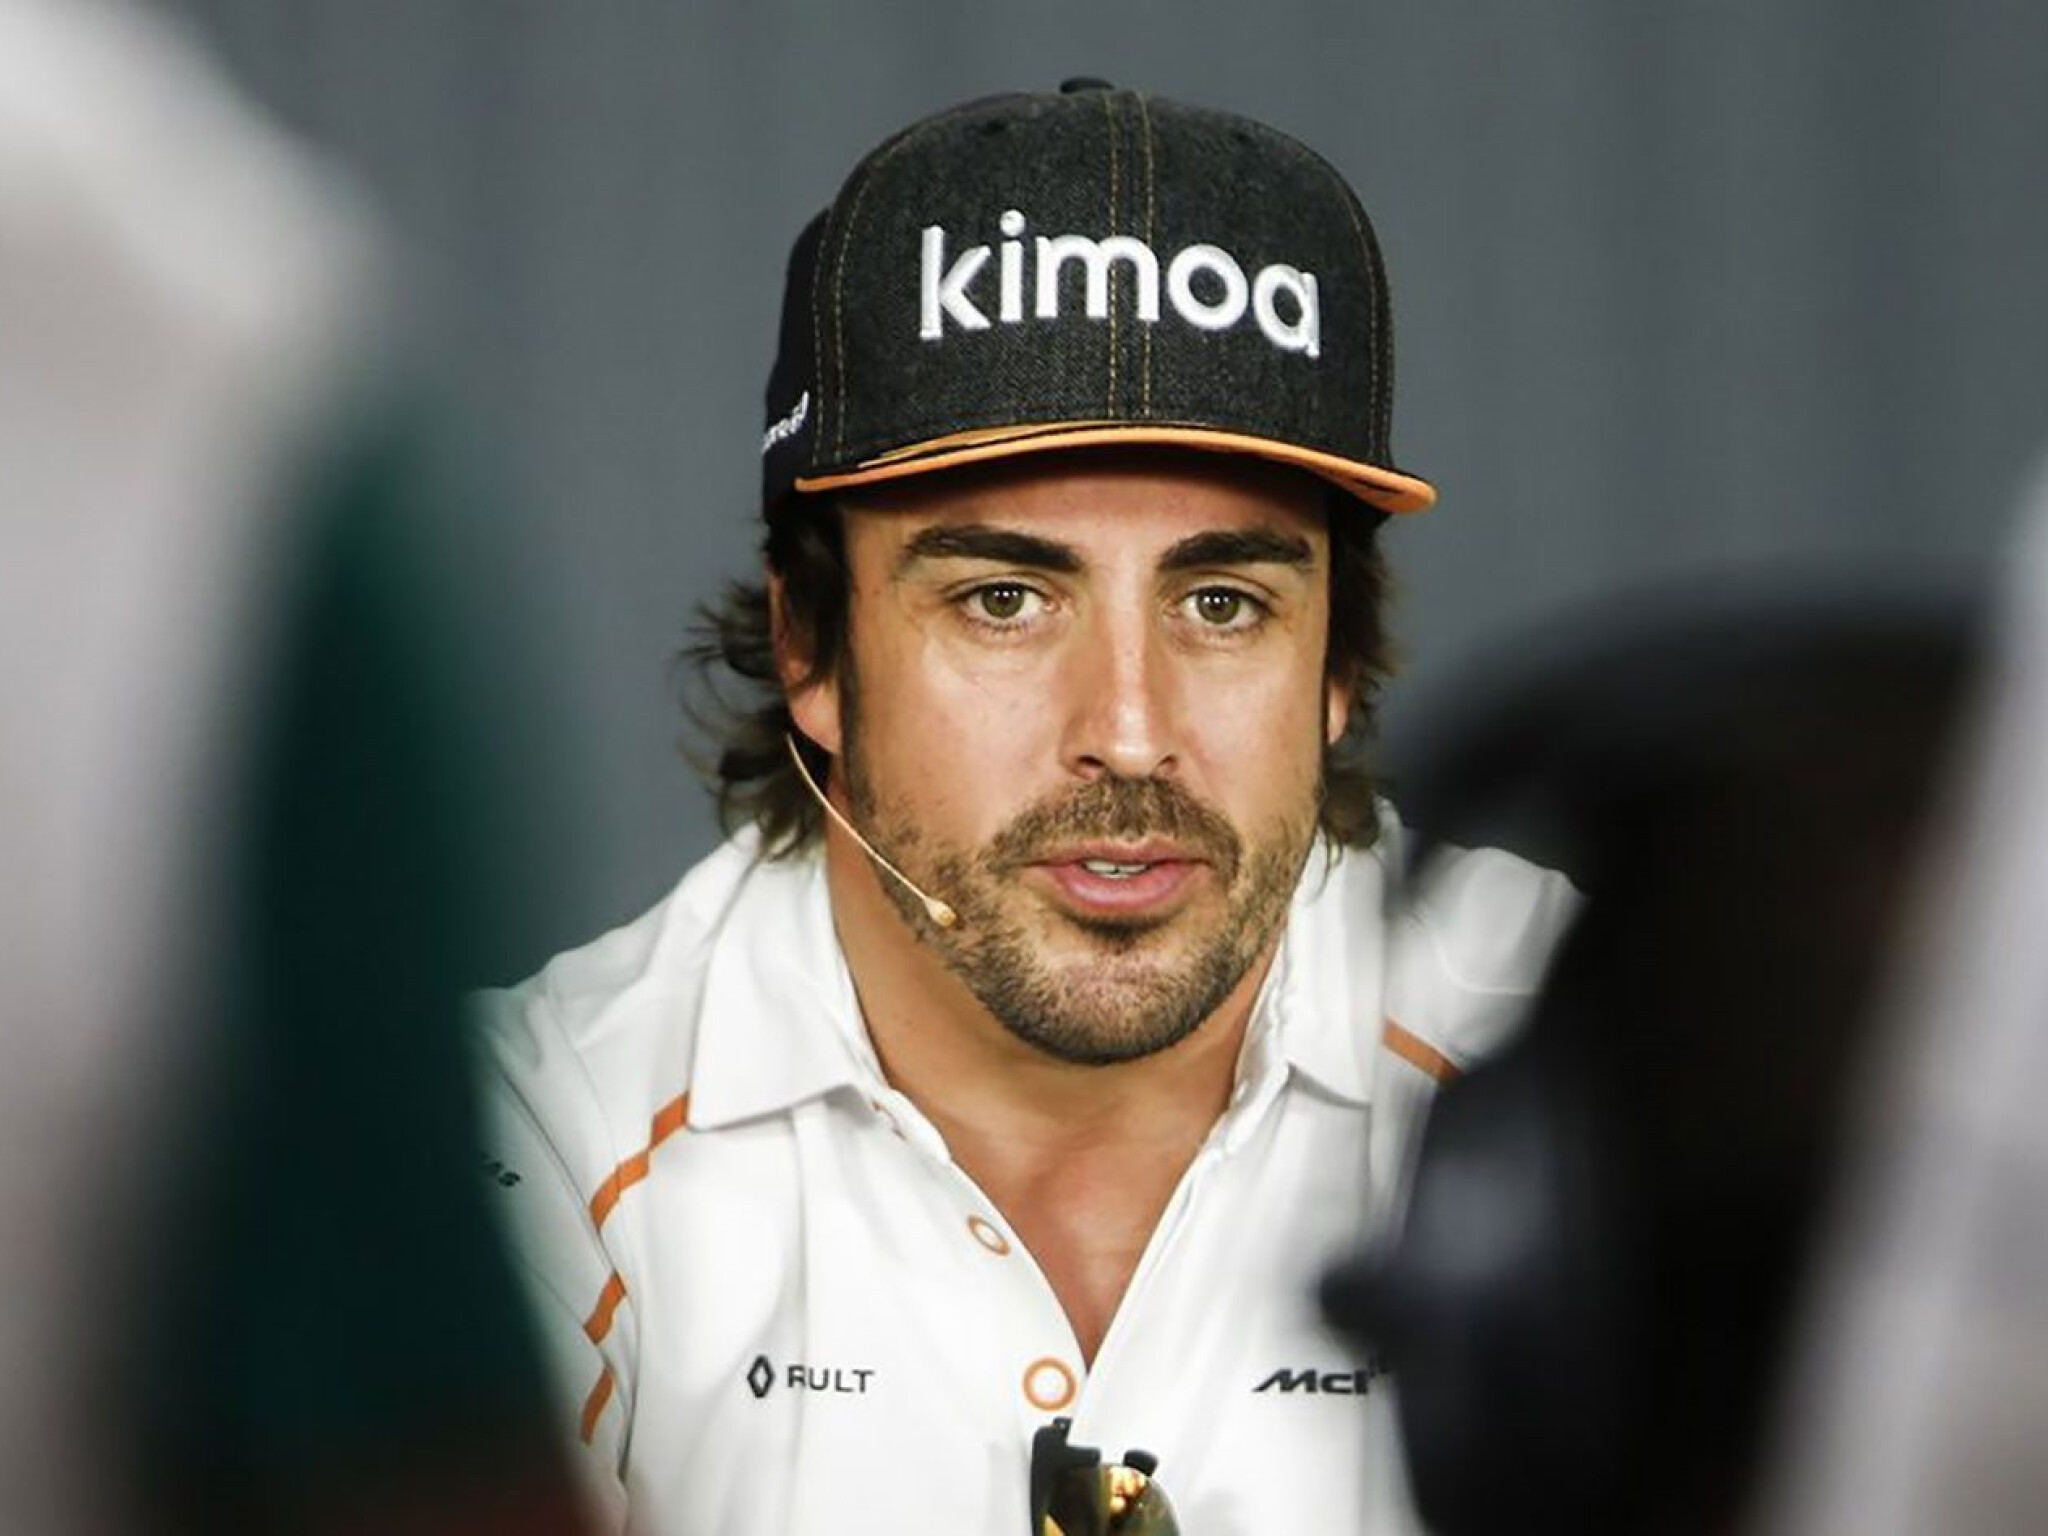 Fernando Alonso to retire from F1 at end of the season after 17 years, Fernando  Alonso